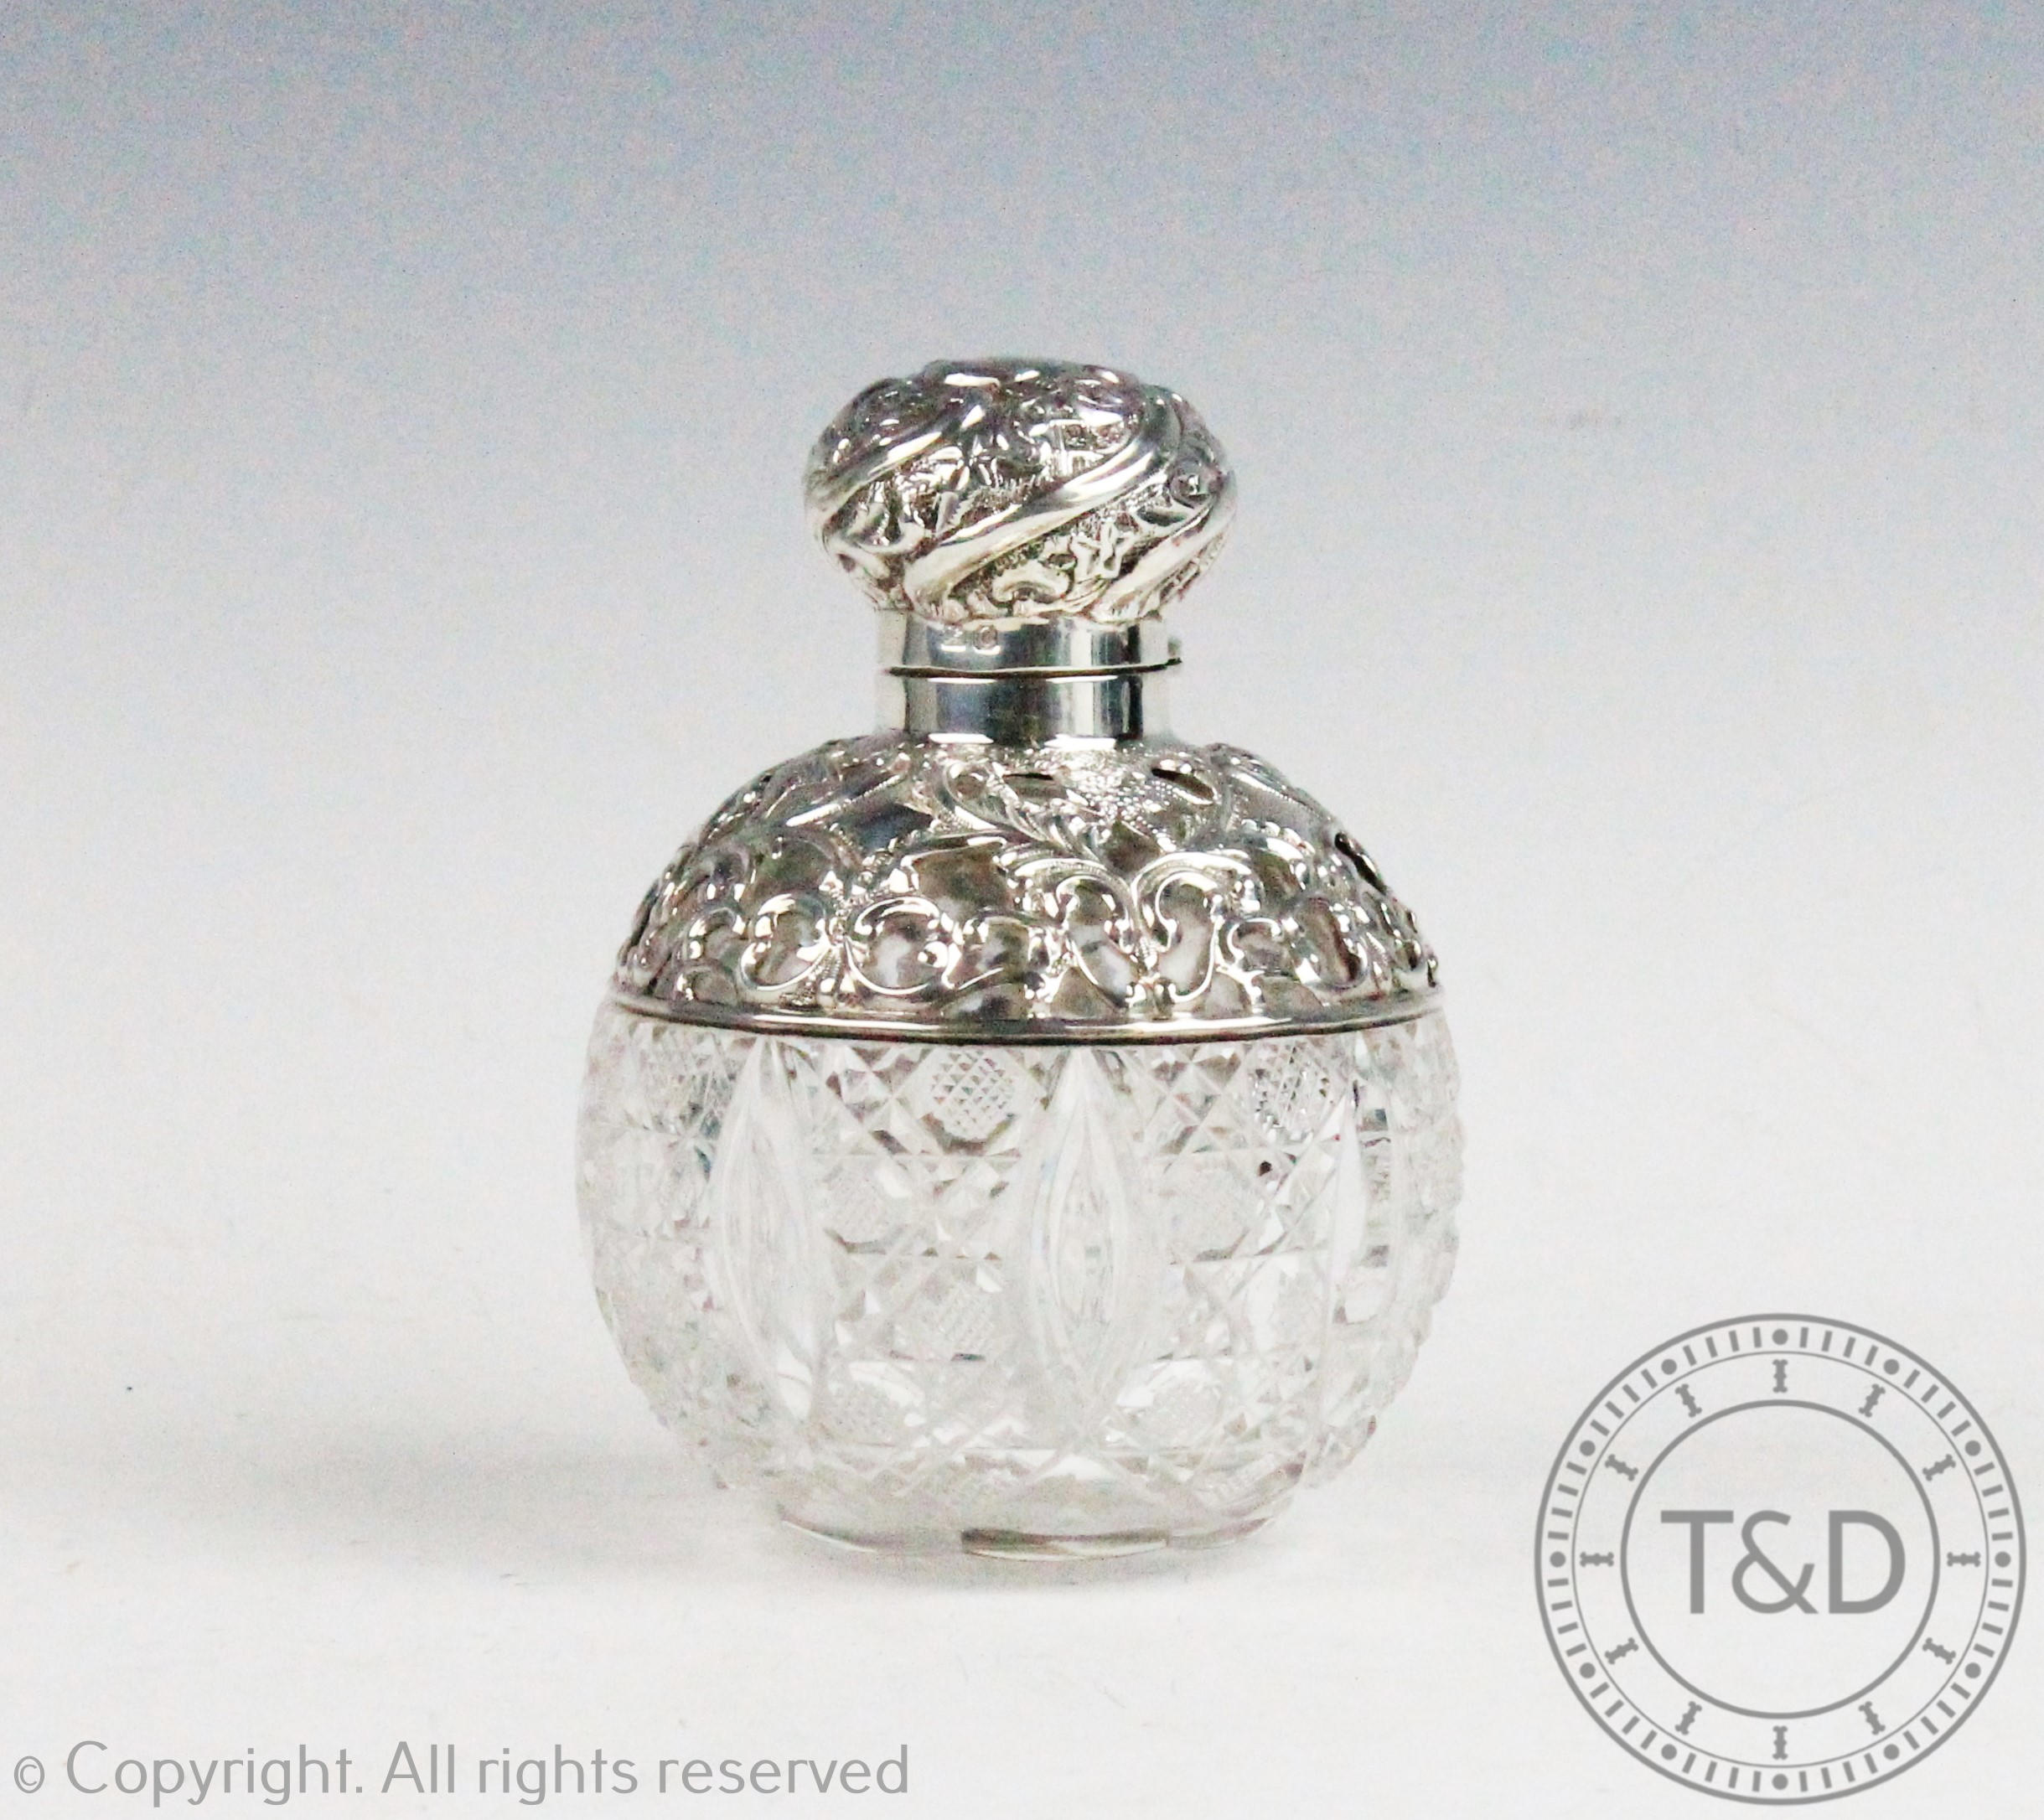 A silver mounted glass scent bottle, James Deakin & Sons, Chester 1897,